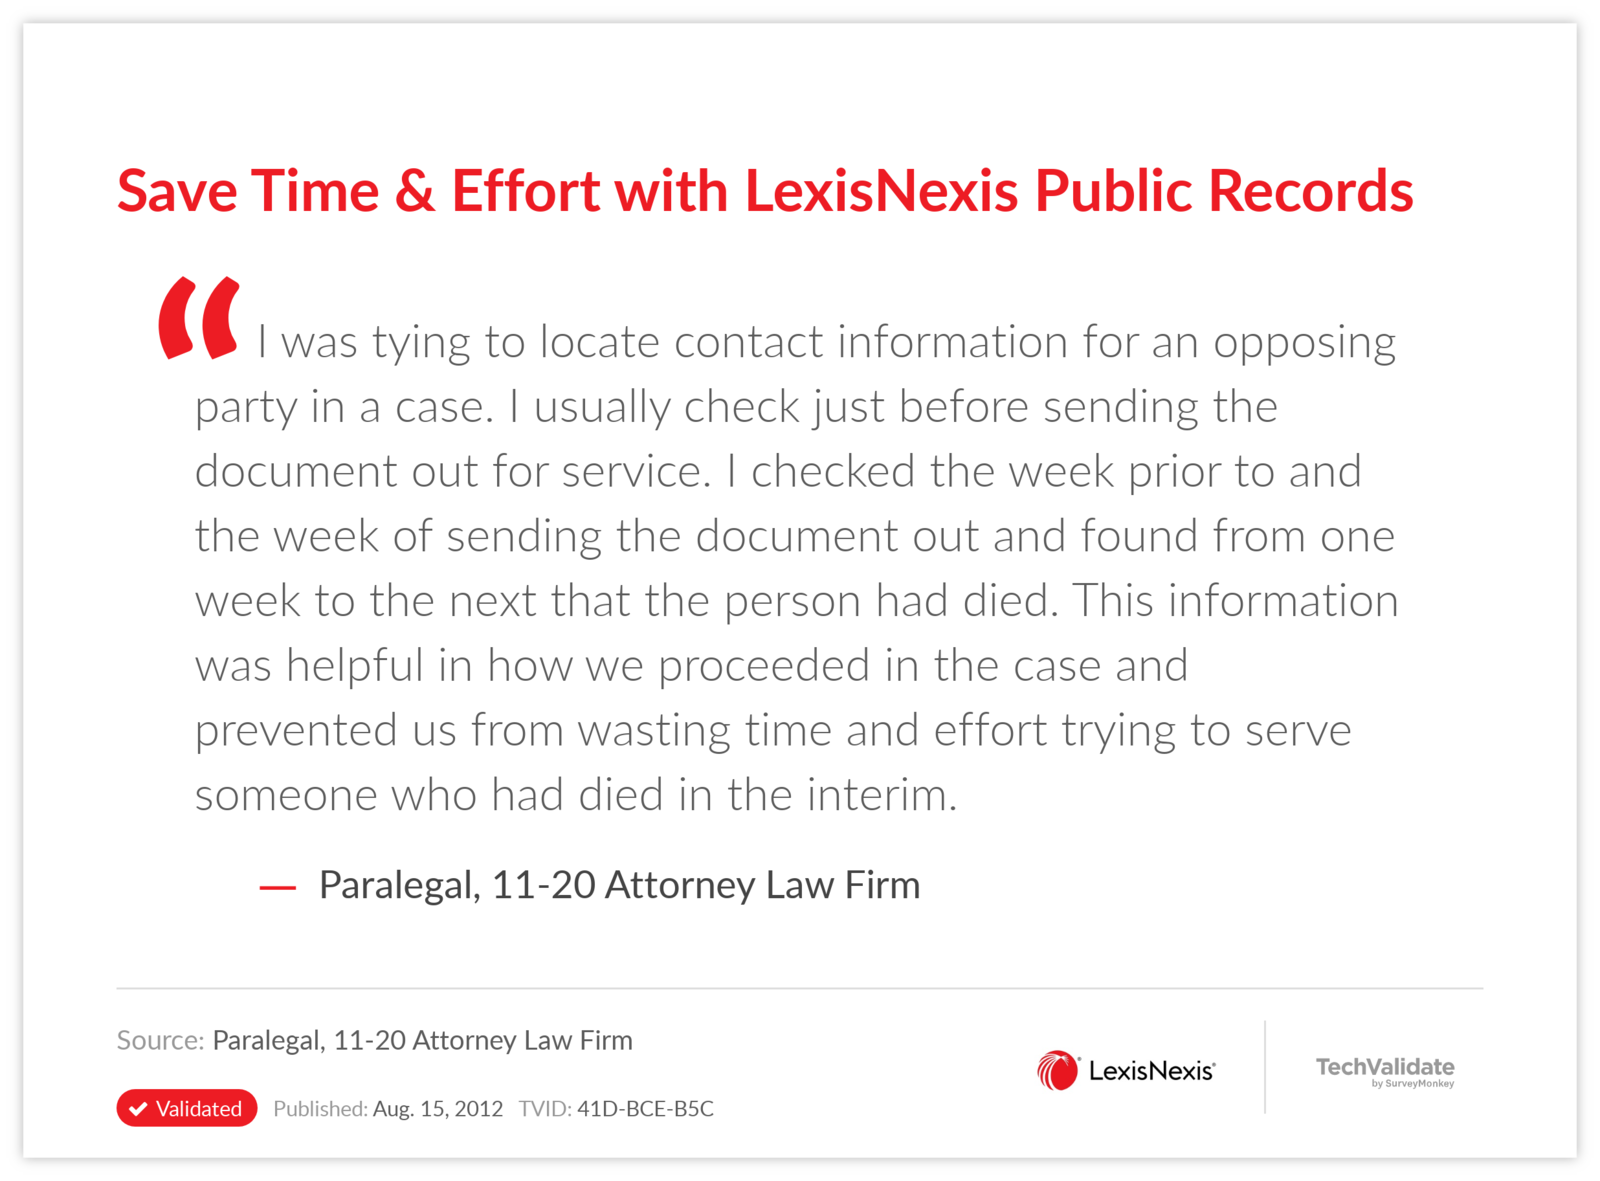 Save Time & Effort with LexisNexis Public Records